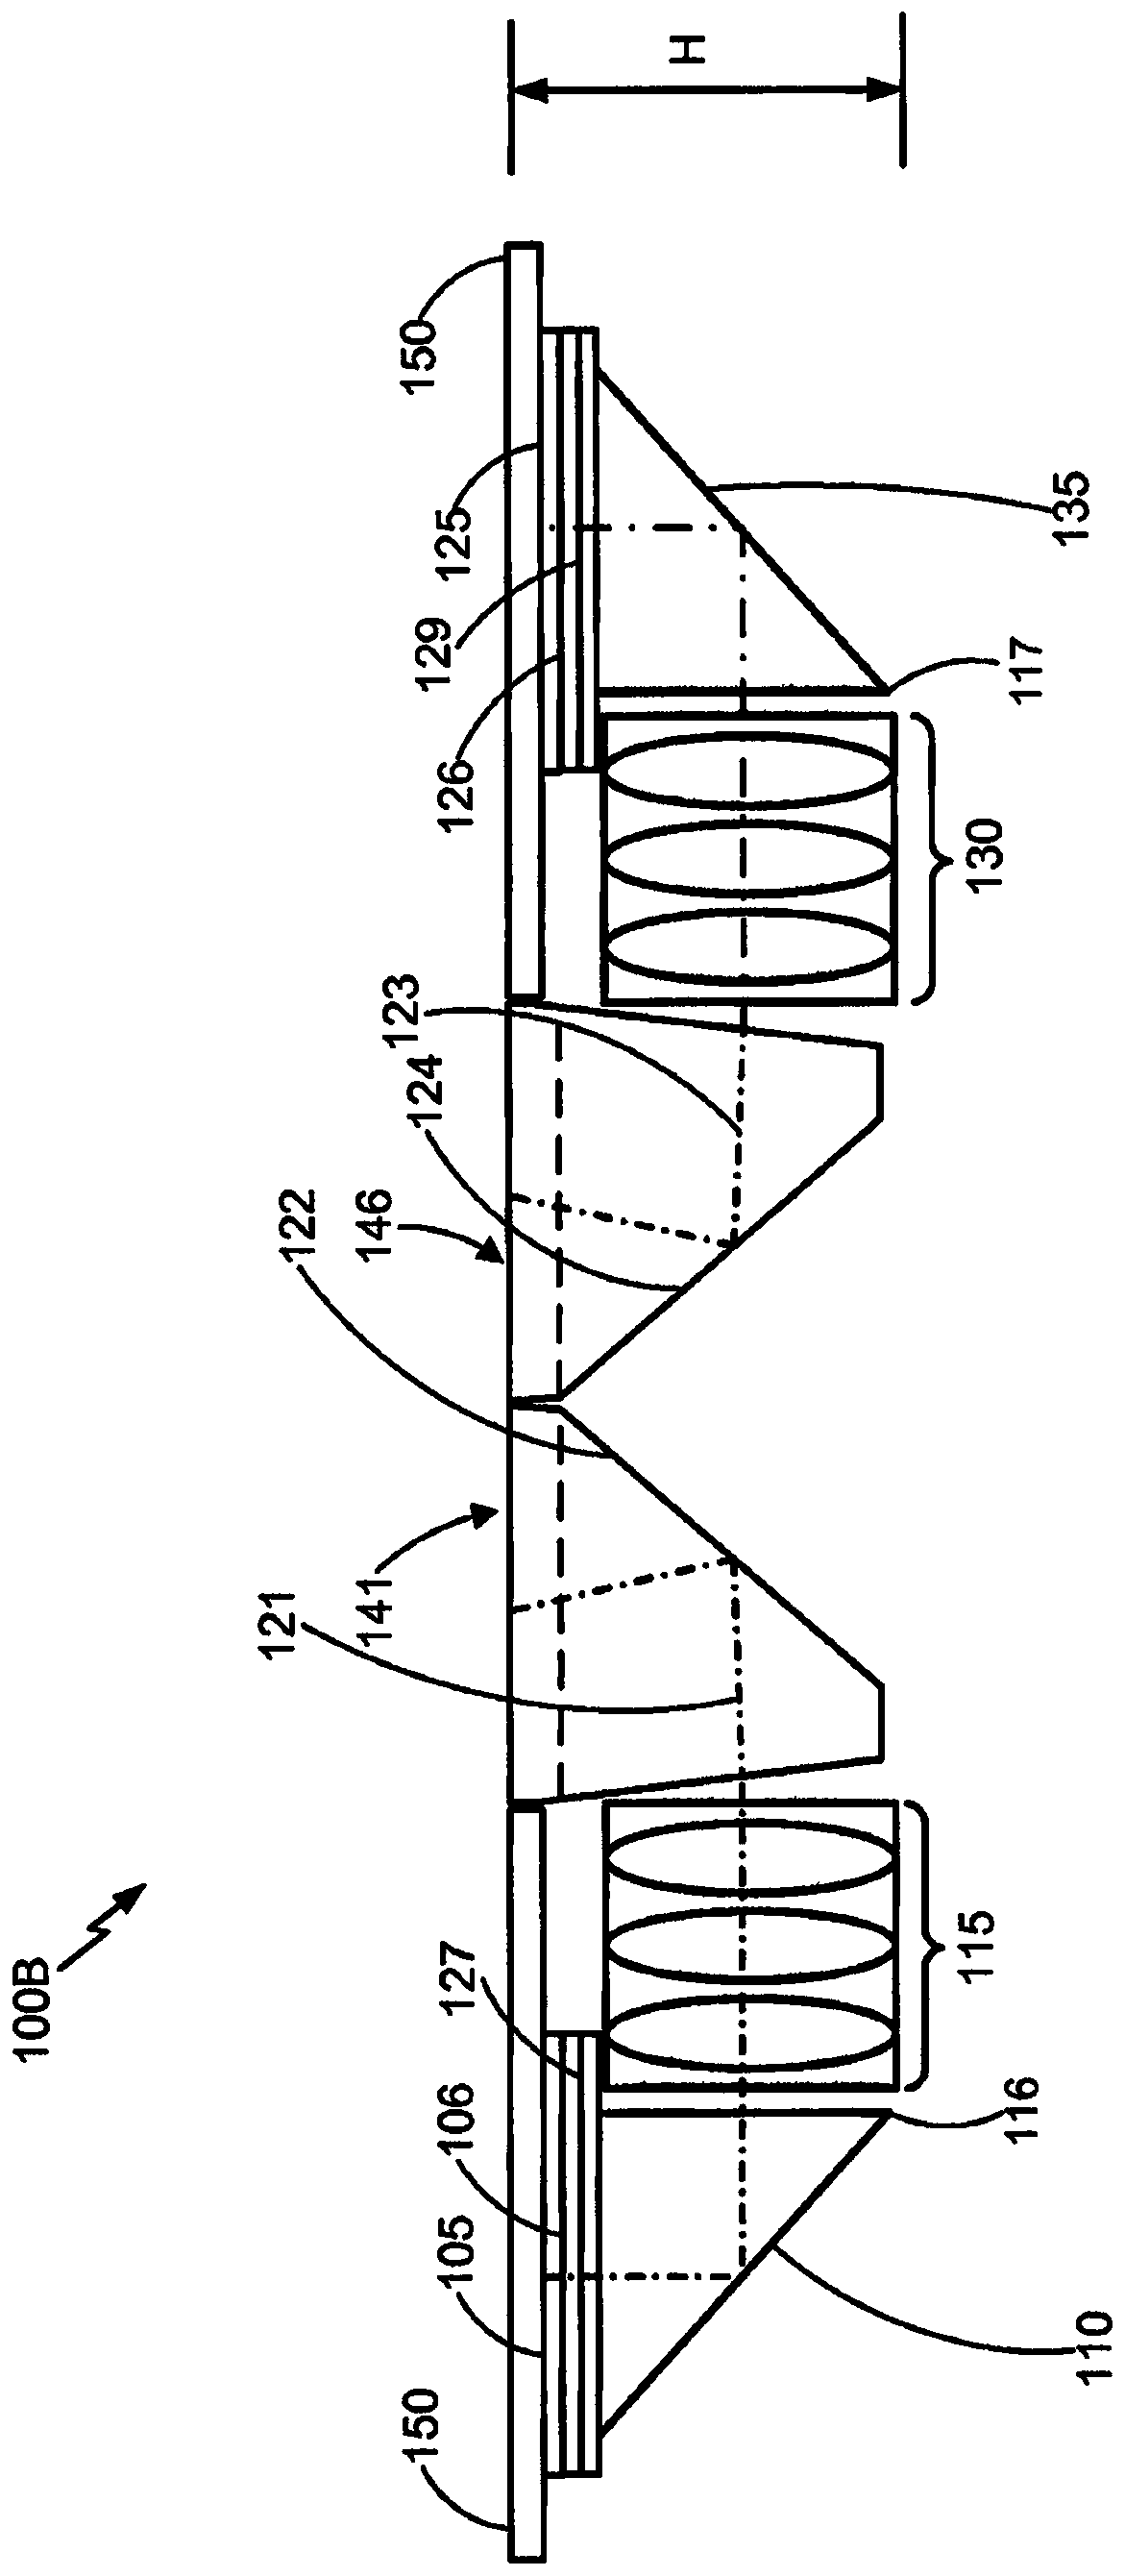 Folded Optical Array Camera Using Refracting Prisms